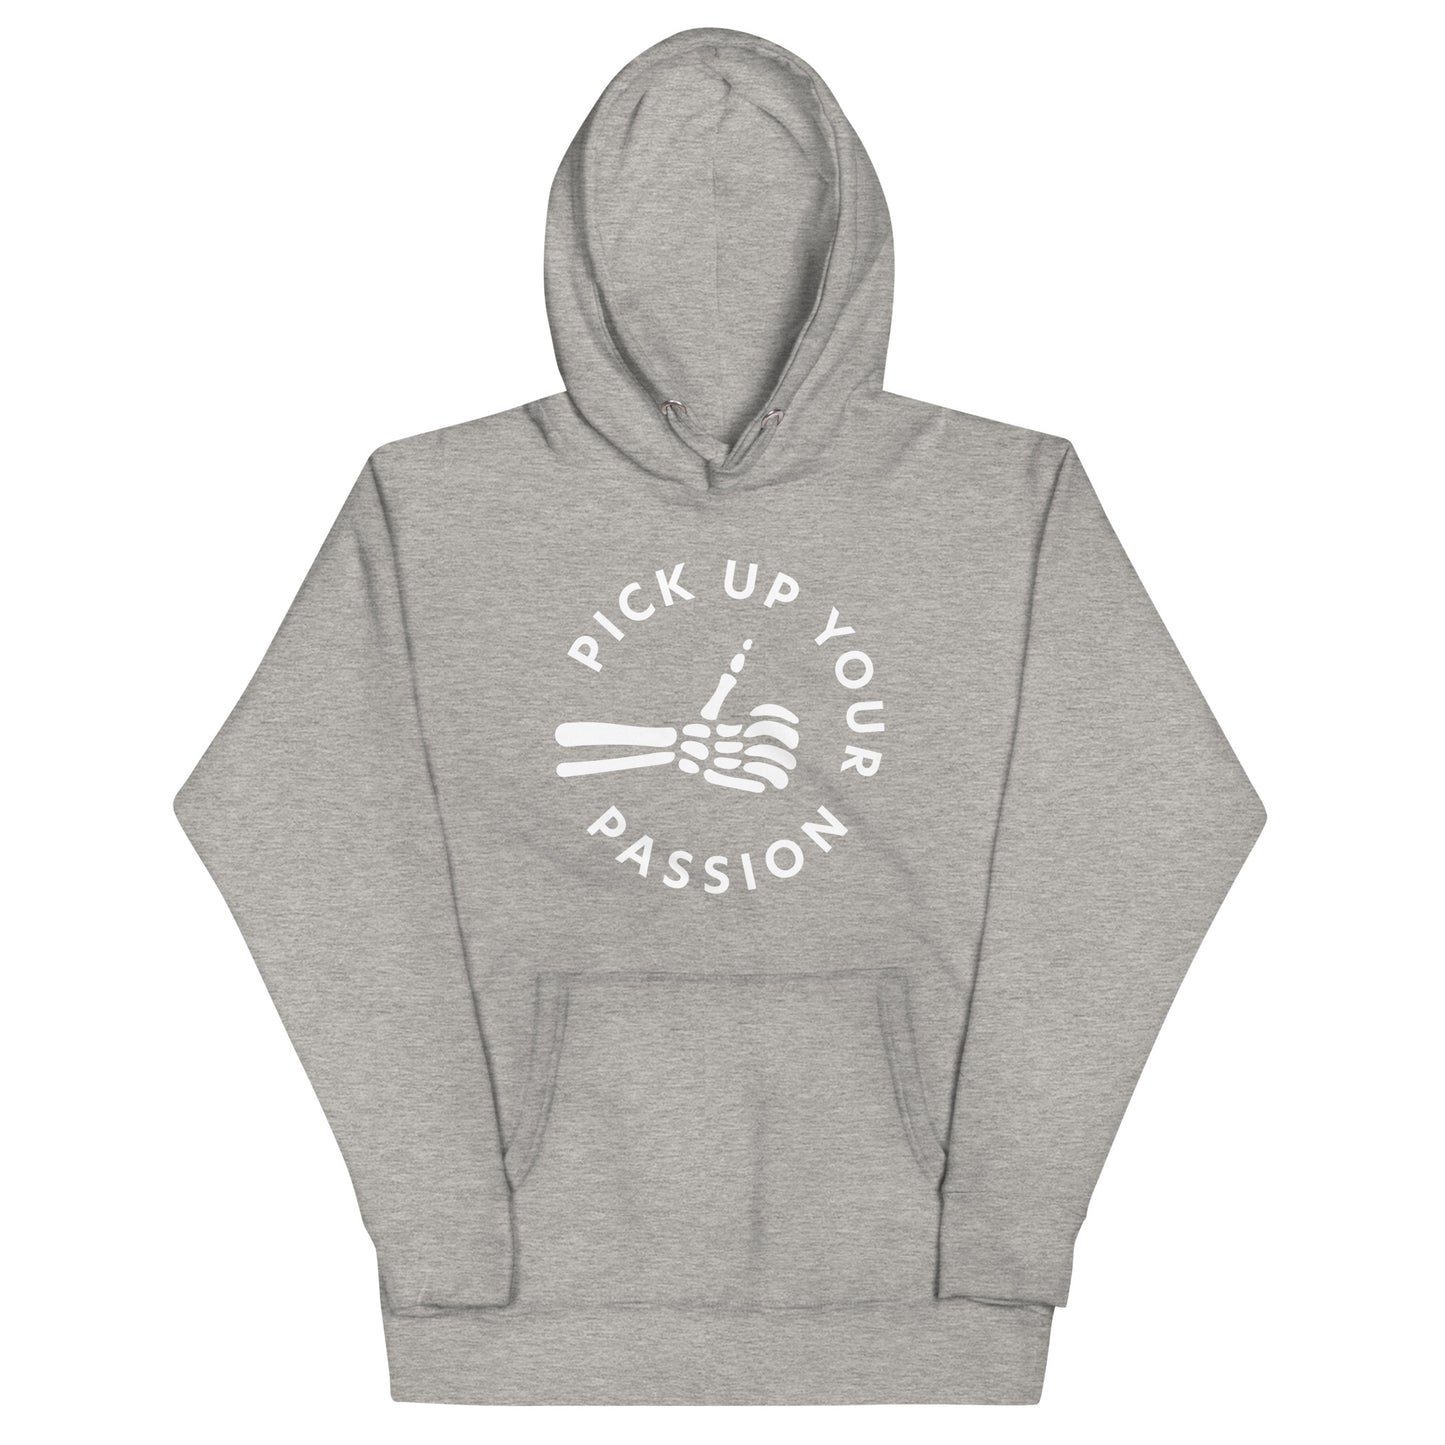 Pick Up Your Passion Hoodie